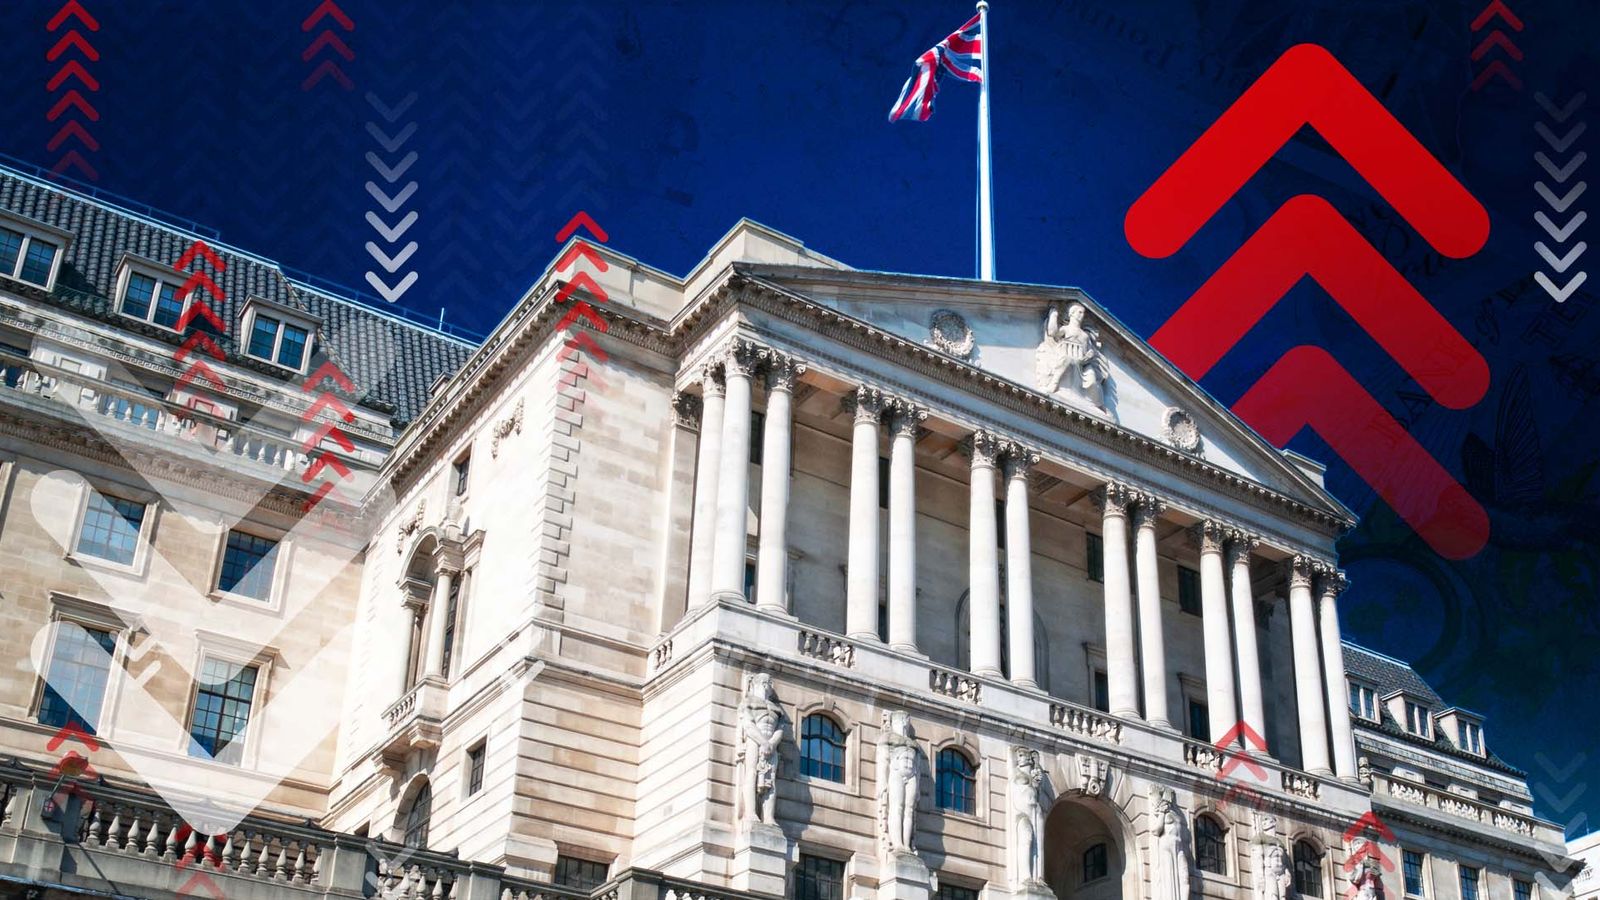 Pound steadies as markets expect Bank of England action to prop up UK currency